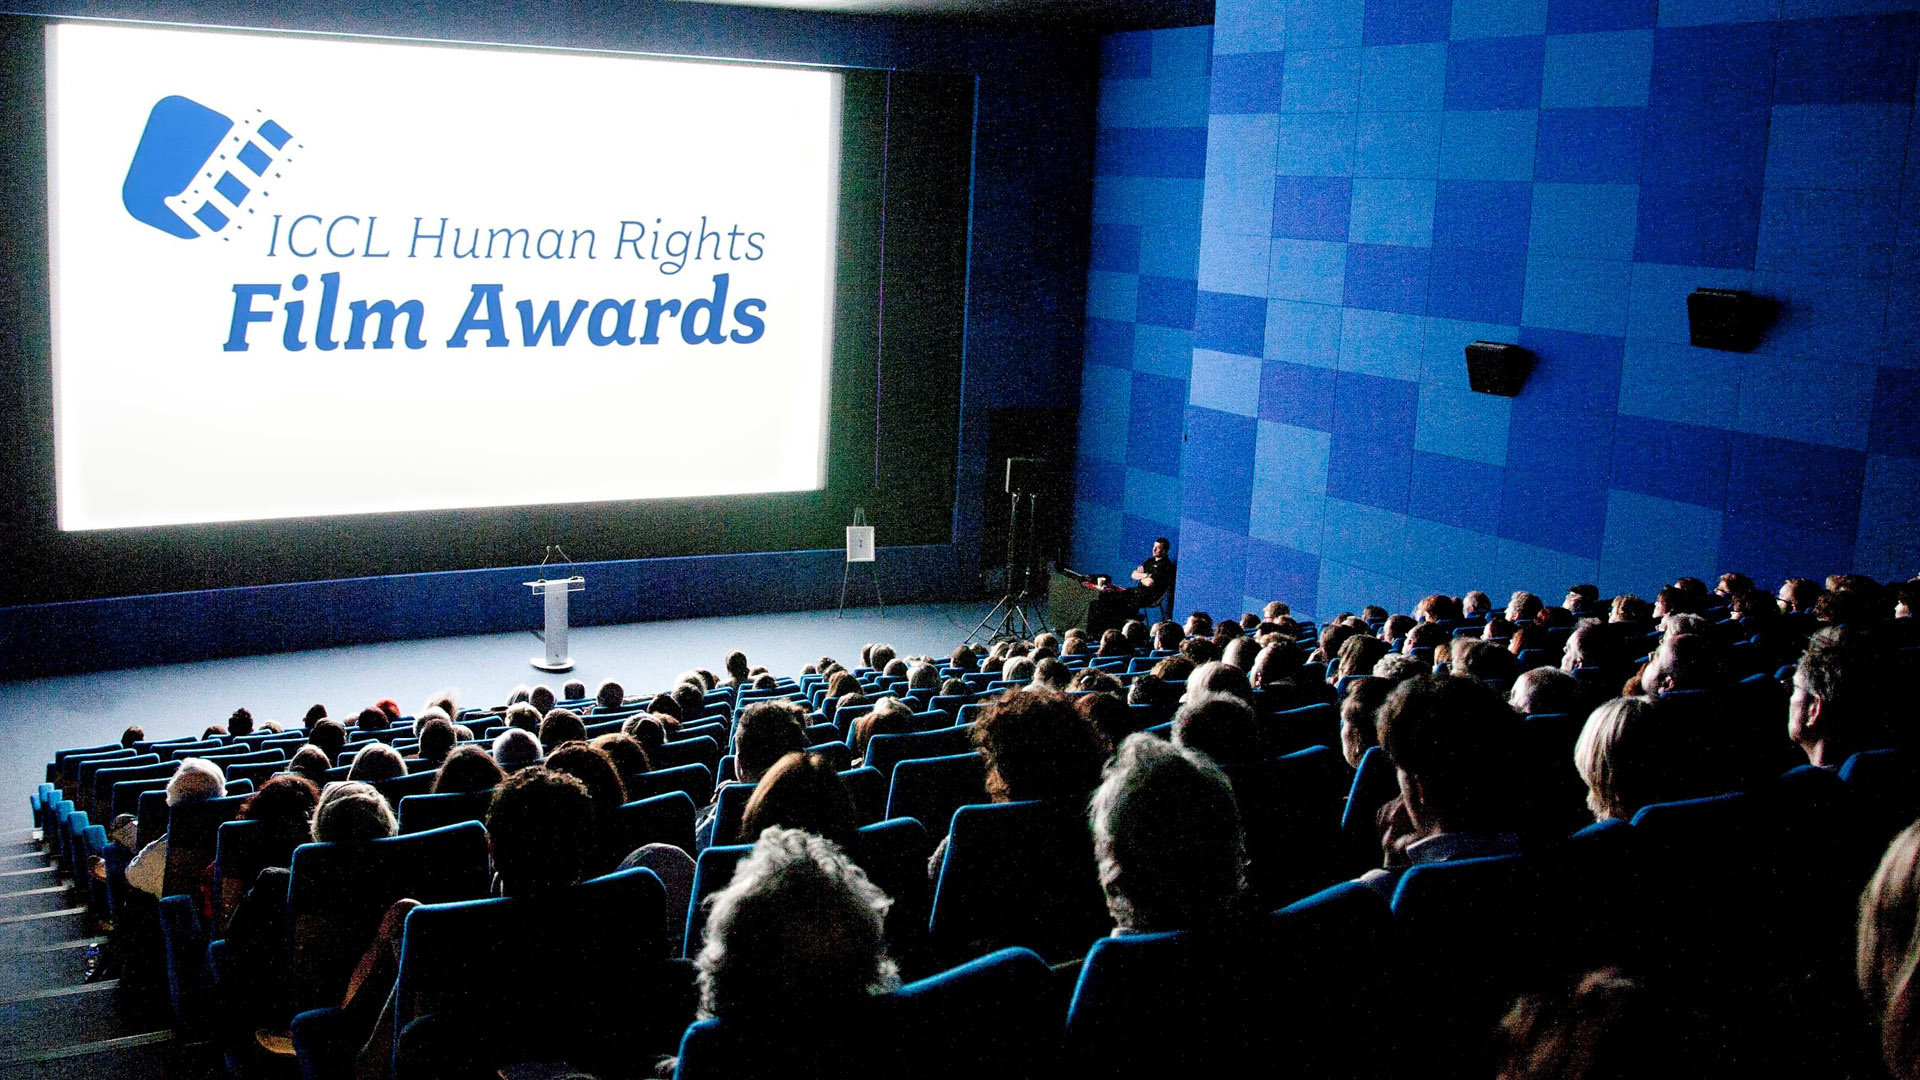 ICCL Human Rights Film Awards 2014 